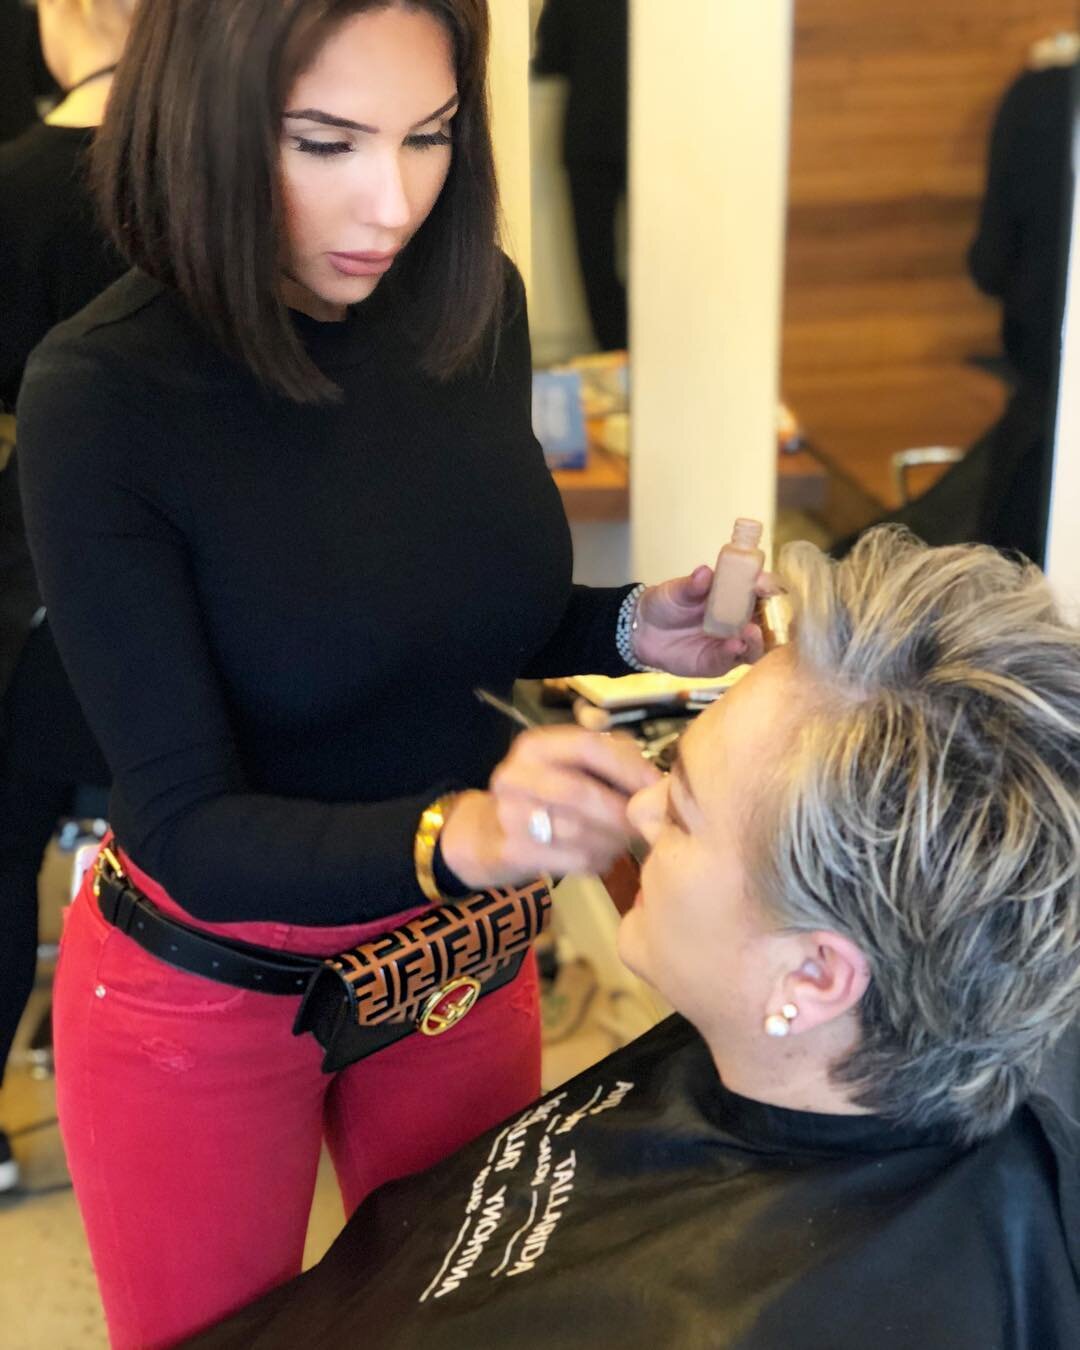 Make - up now available at the salon by appointment with Make - up artist and beauty influencer @sabrina_treffiletti 💄💇🏼&zwj;♀️ #makeup#hair#makeupartist#mosmonsalon#mosmon#northshore#blogger#beauty#hairdresser#instagram#instahair#lorealprous#shuu